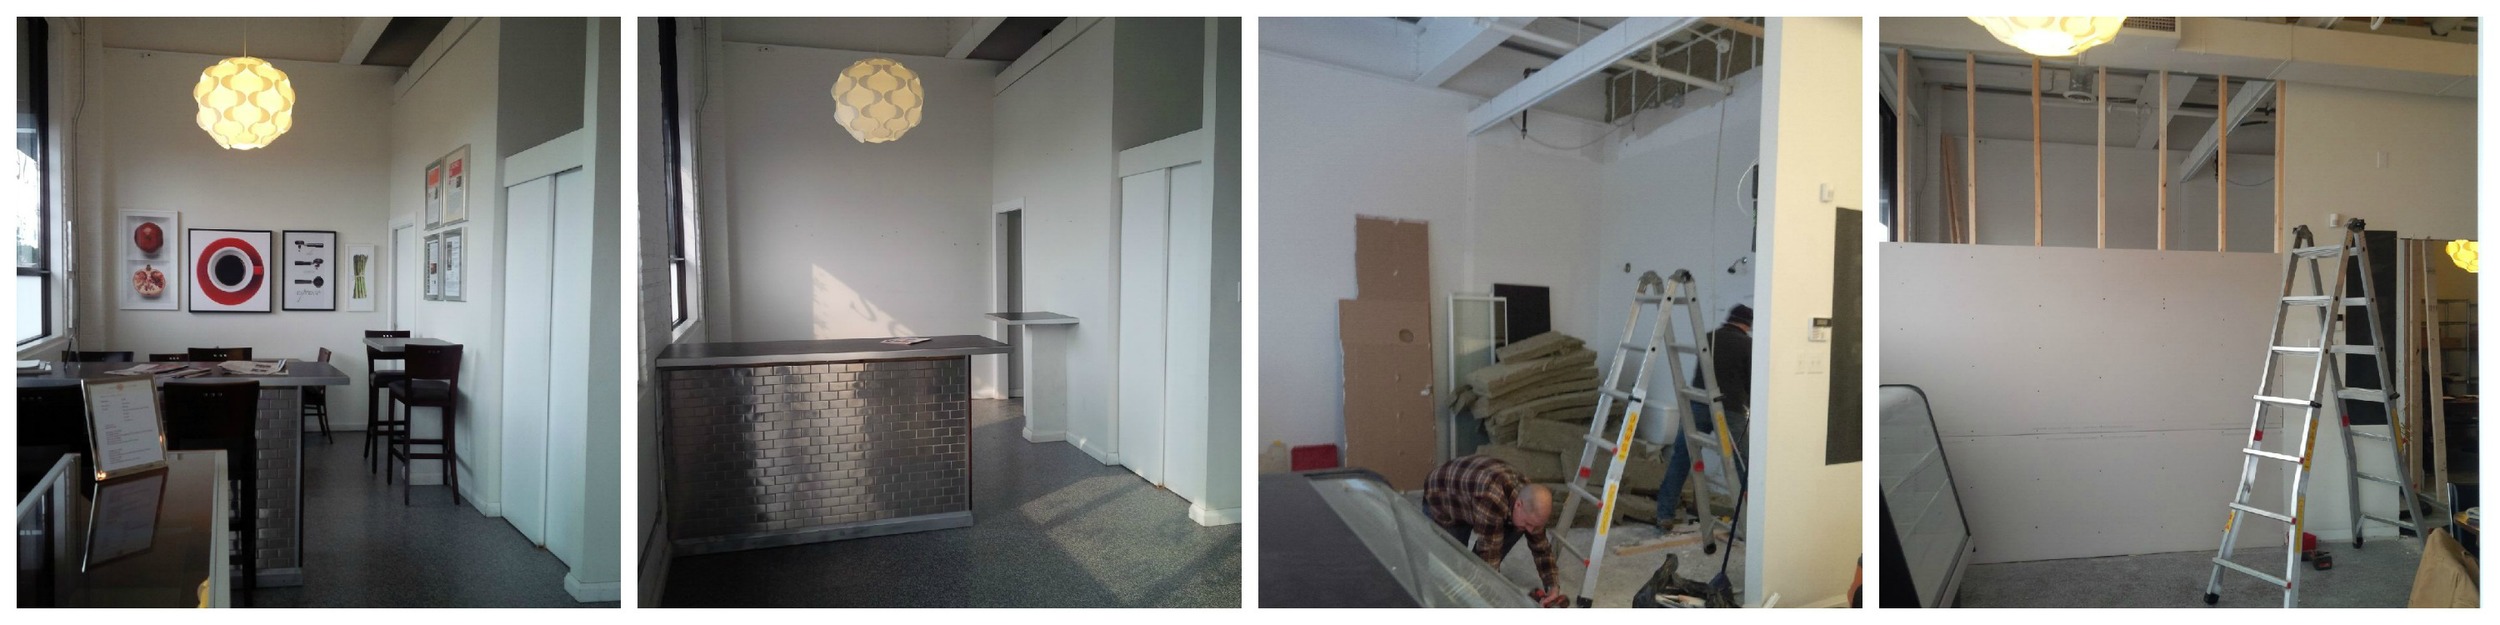 Progression of the space from cafe to 2nd rental kitchen and Manning Canning production space